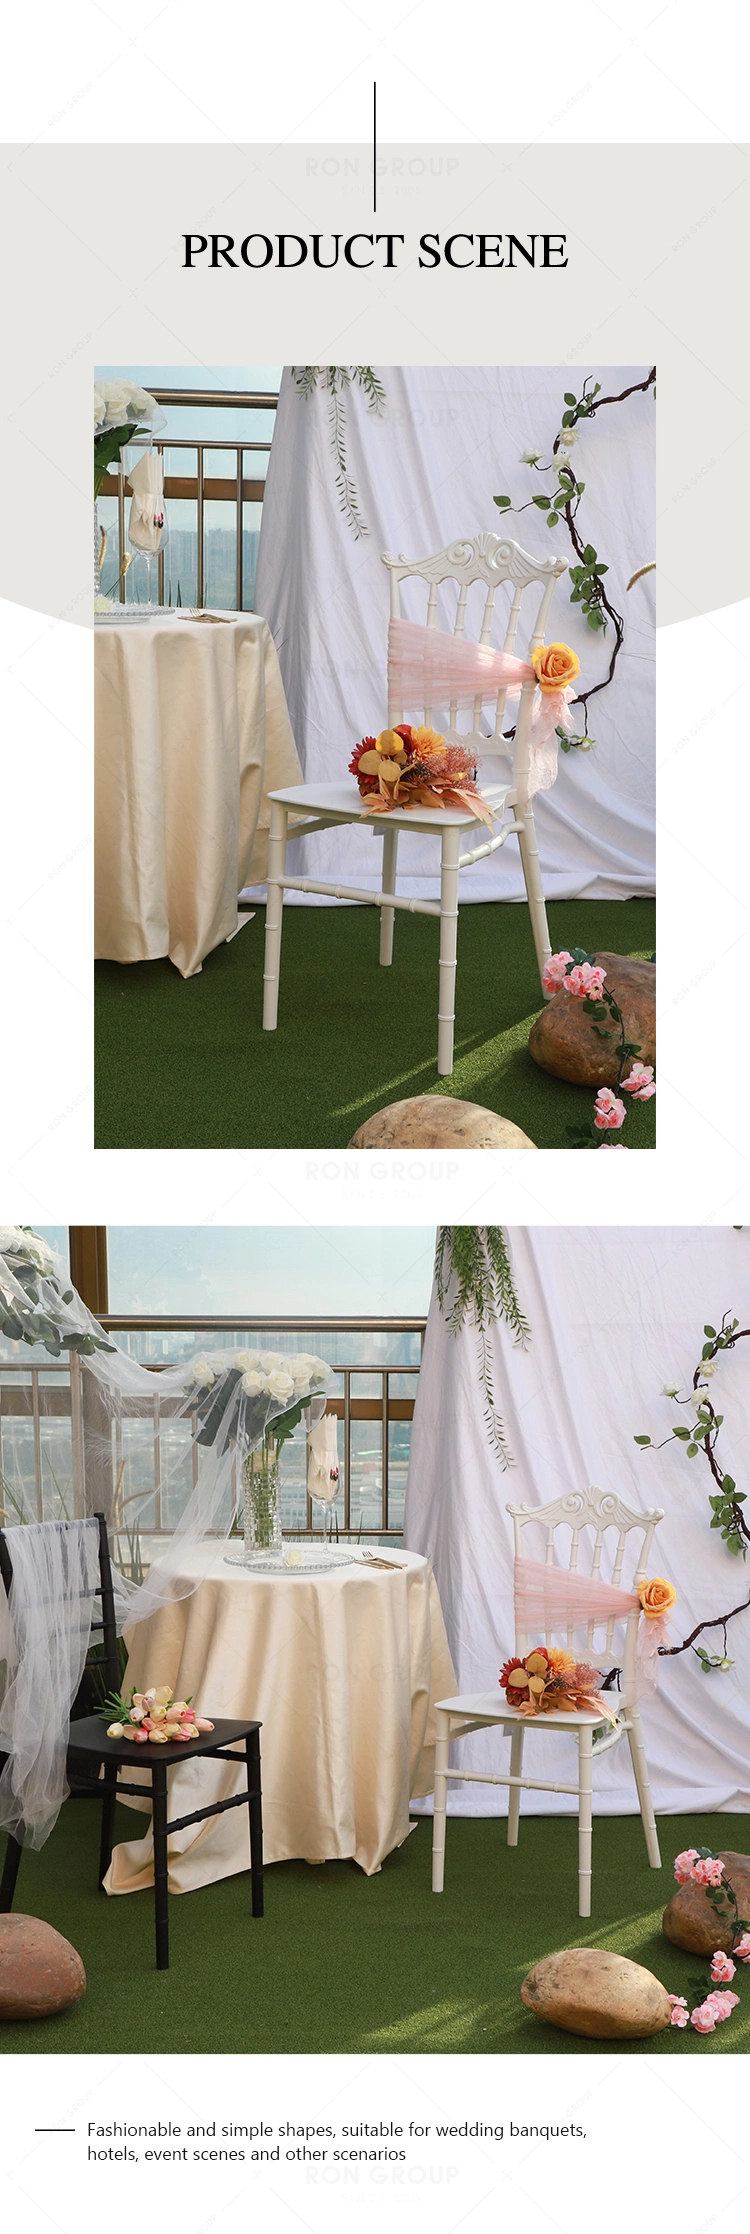 Wholesale Hotel Backrest Chairs Outdoor Lawn Wedding Plastic Dining Chairs